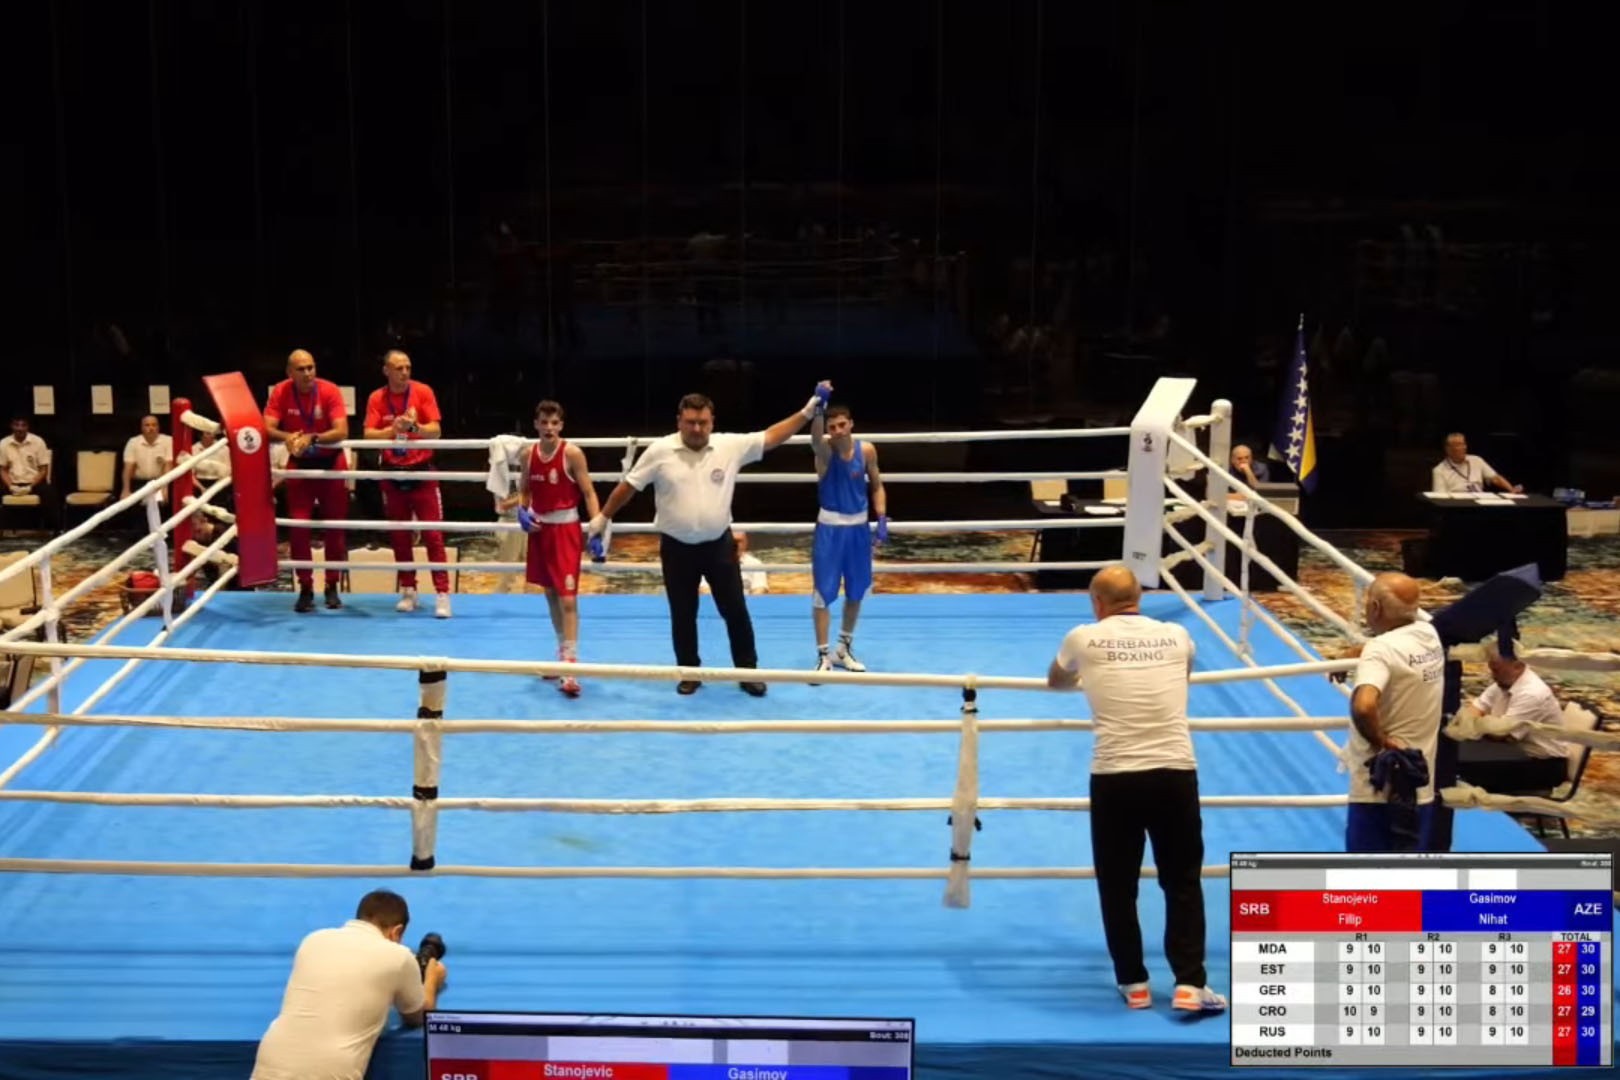 Azerbaijani another boxer reached the final, Nazarova and Taghi won bronze medals